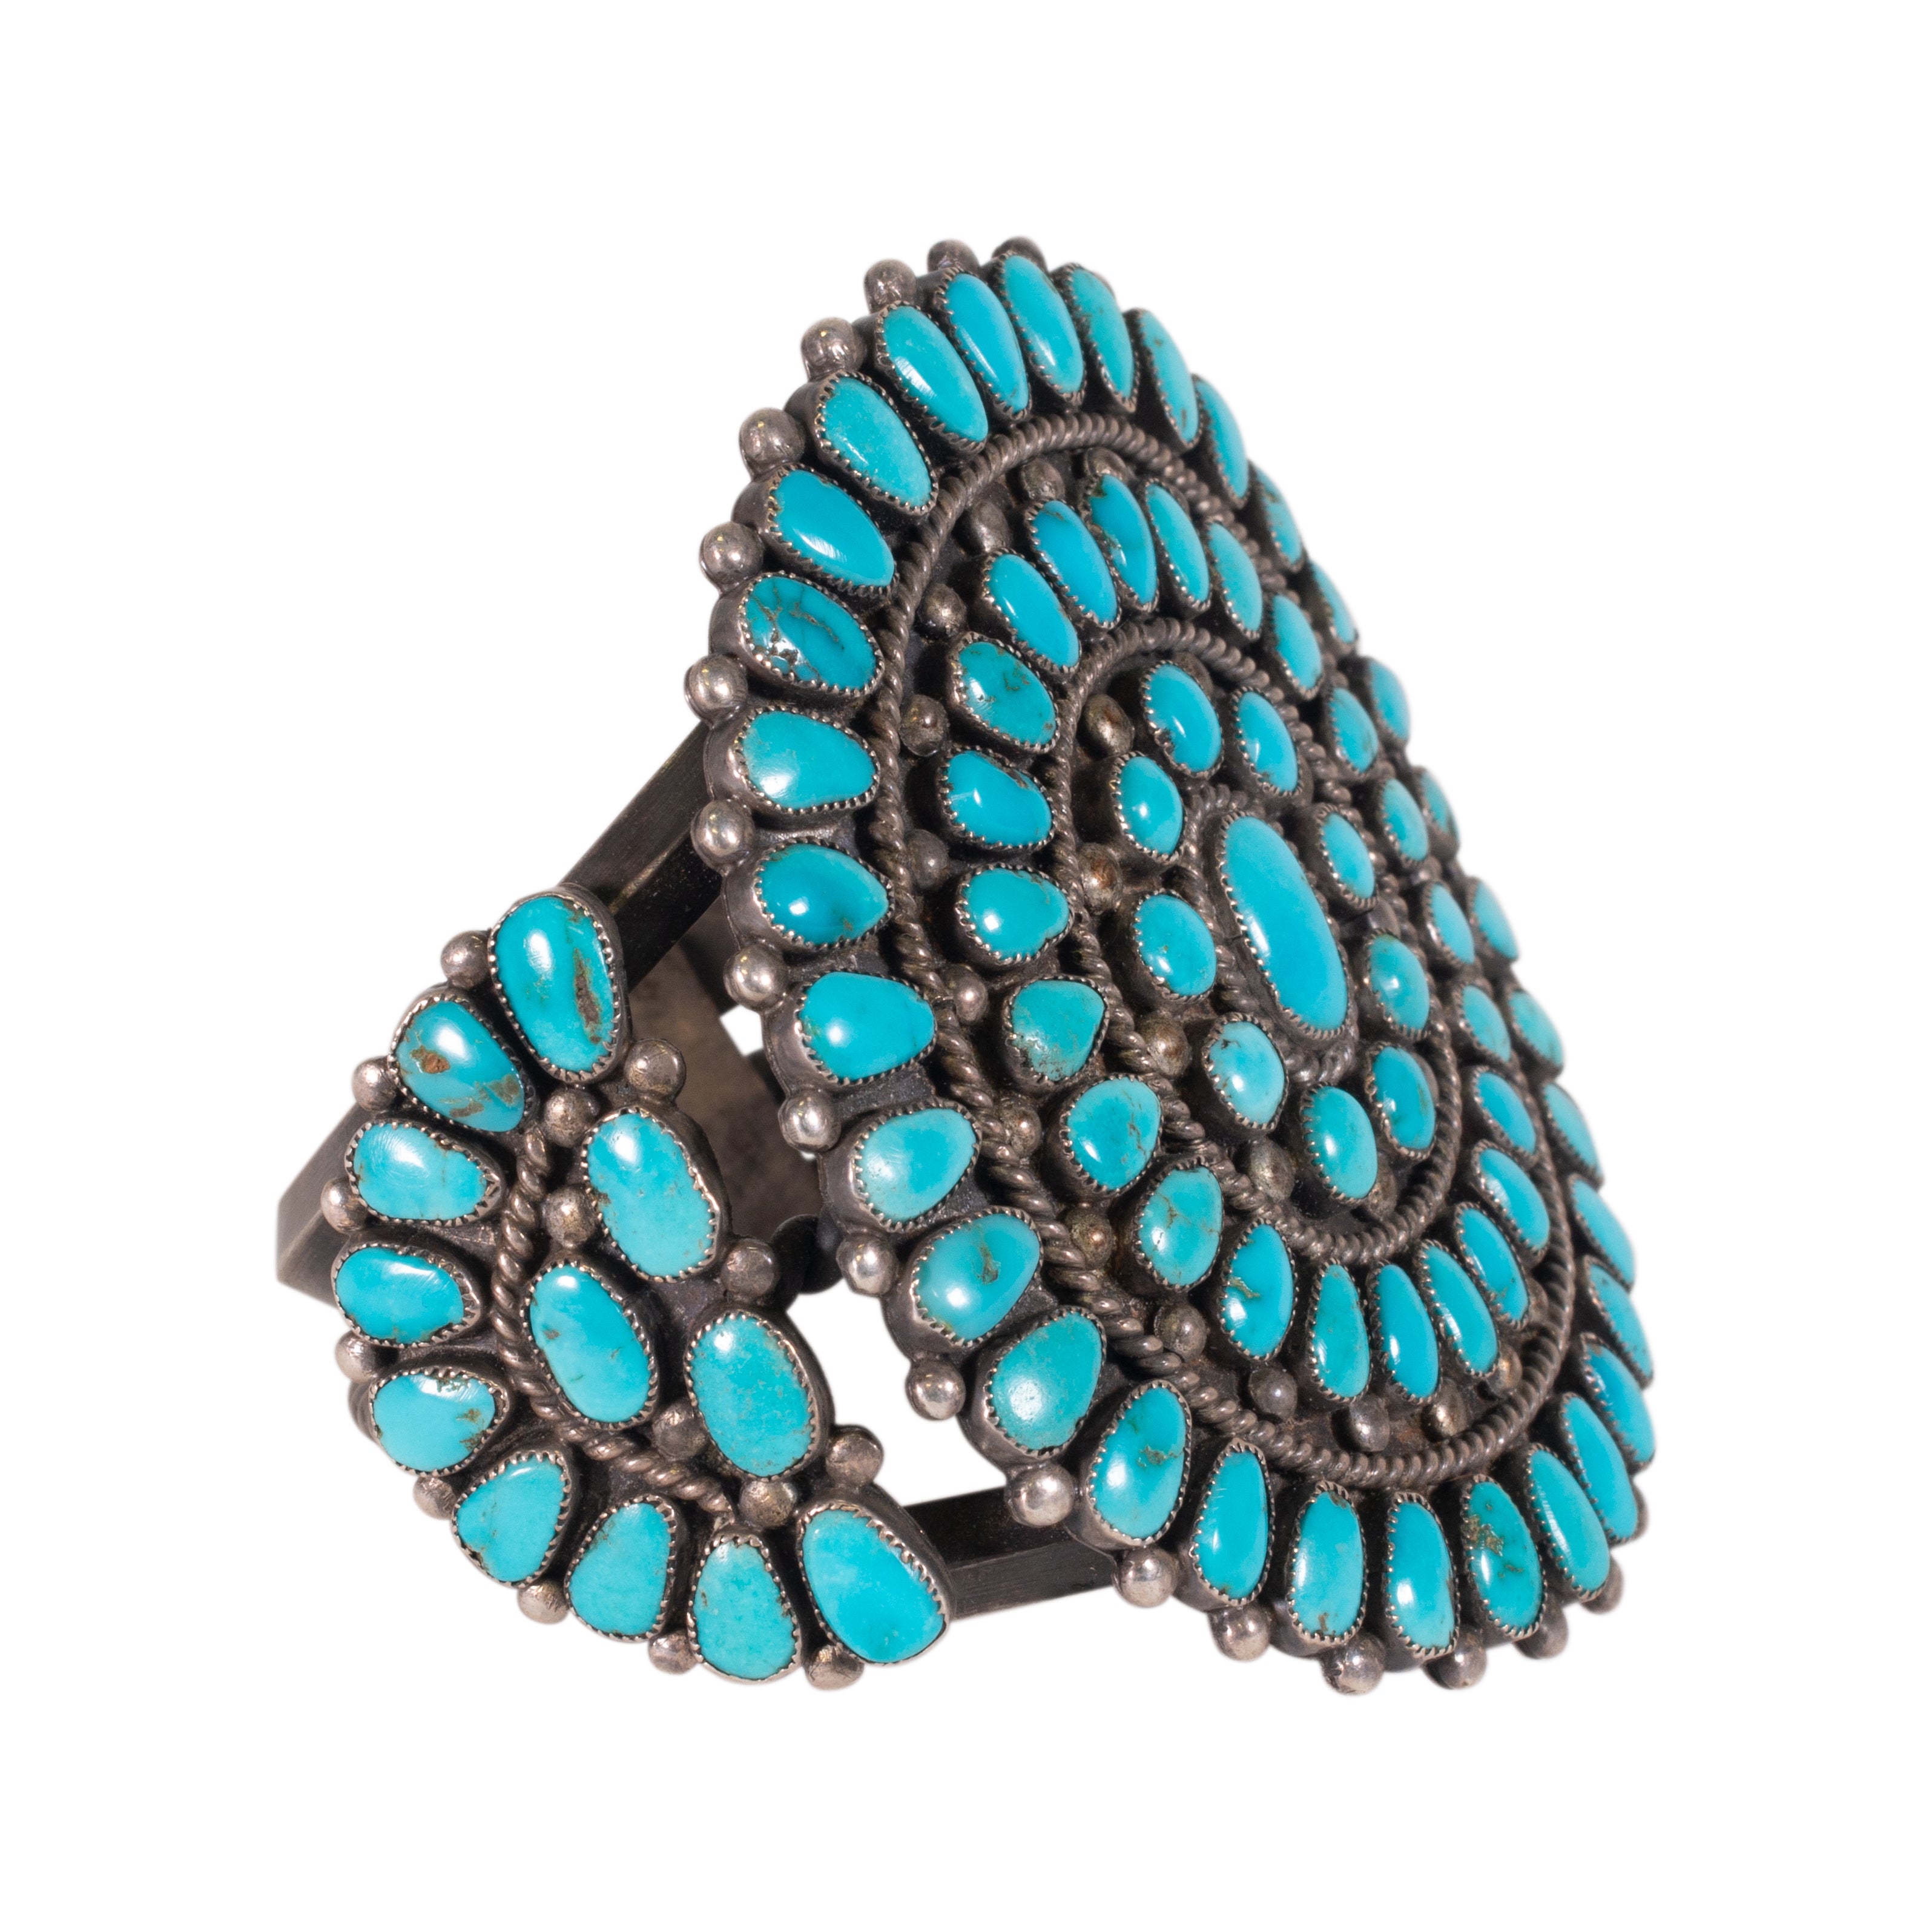 Lone Mountain Cluster Turquoise Bracelet